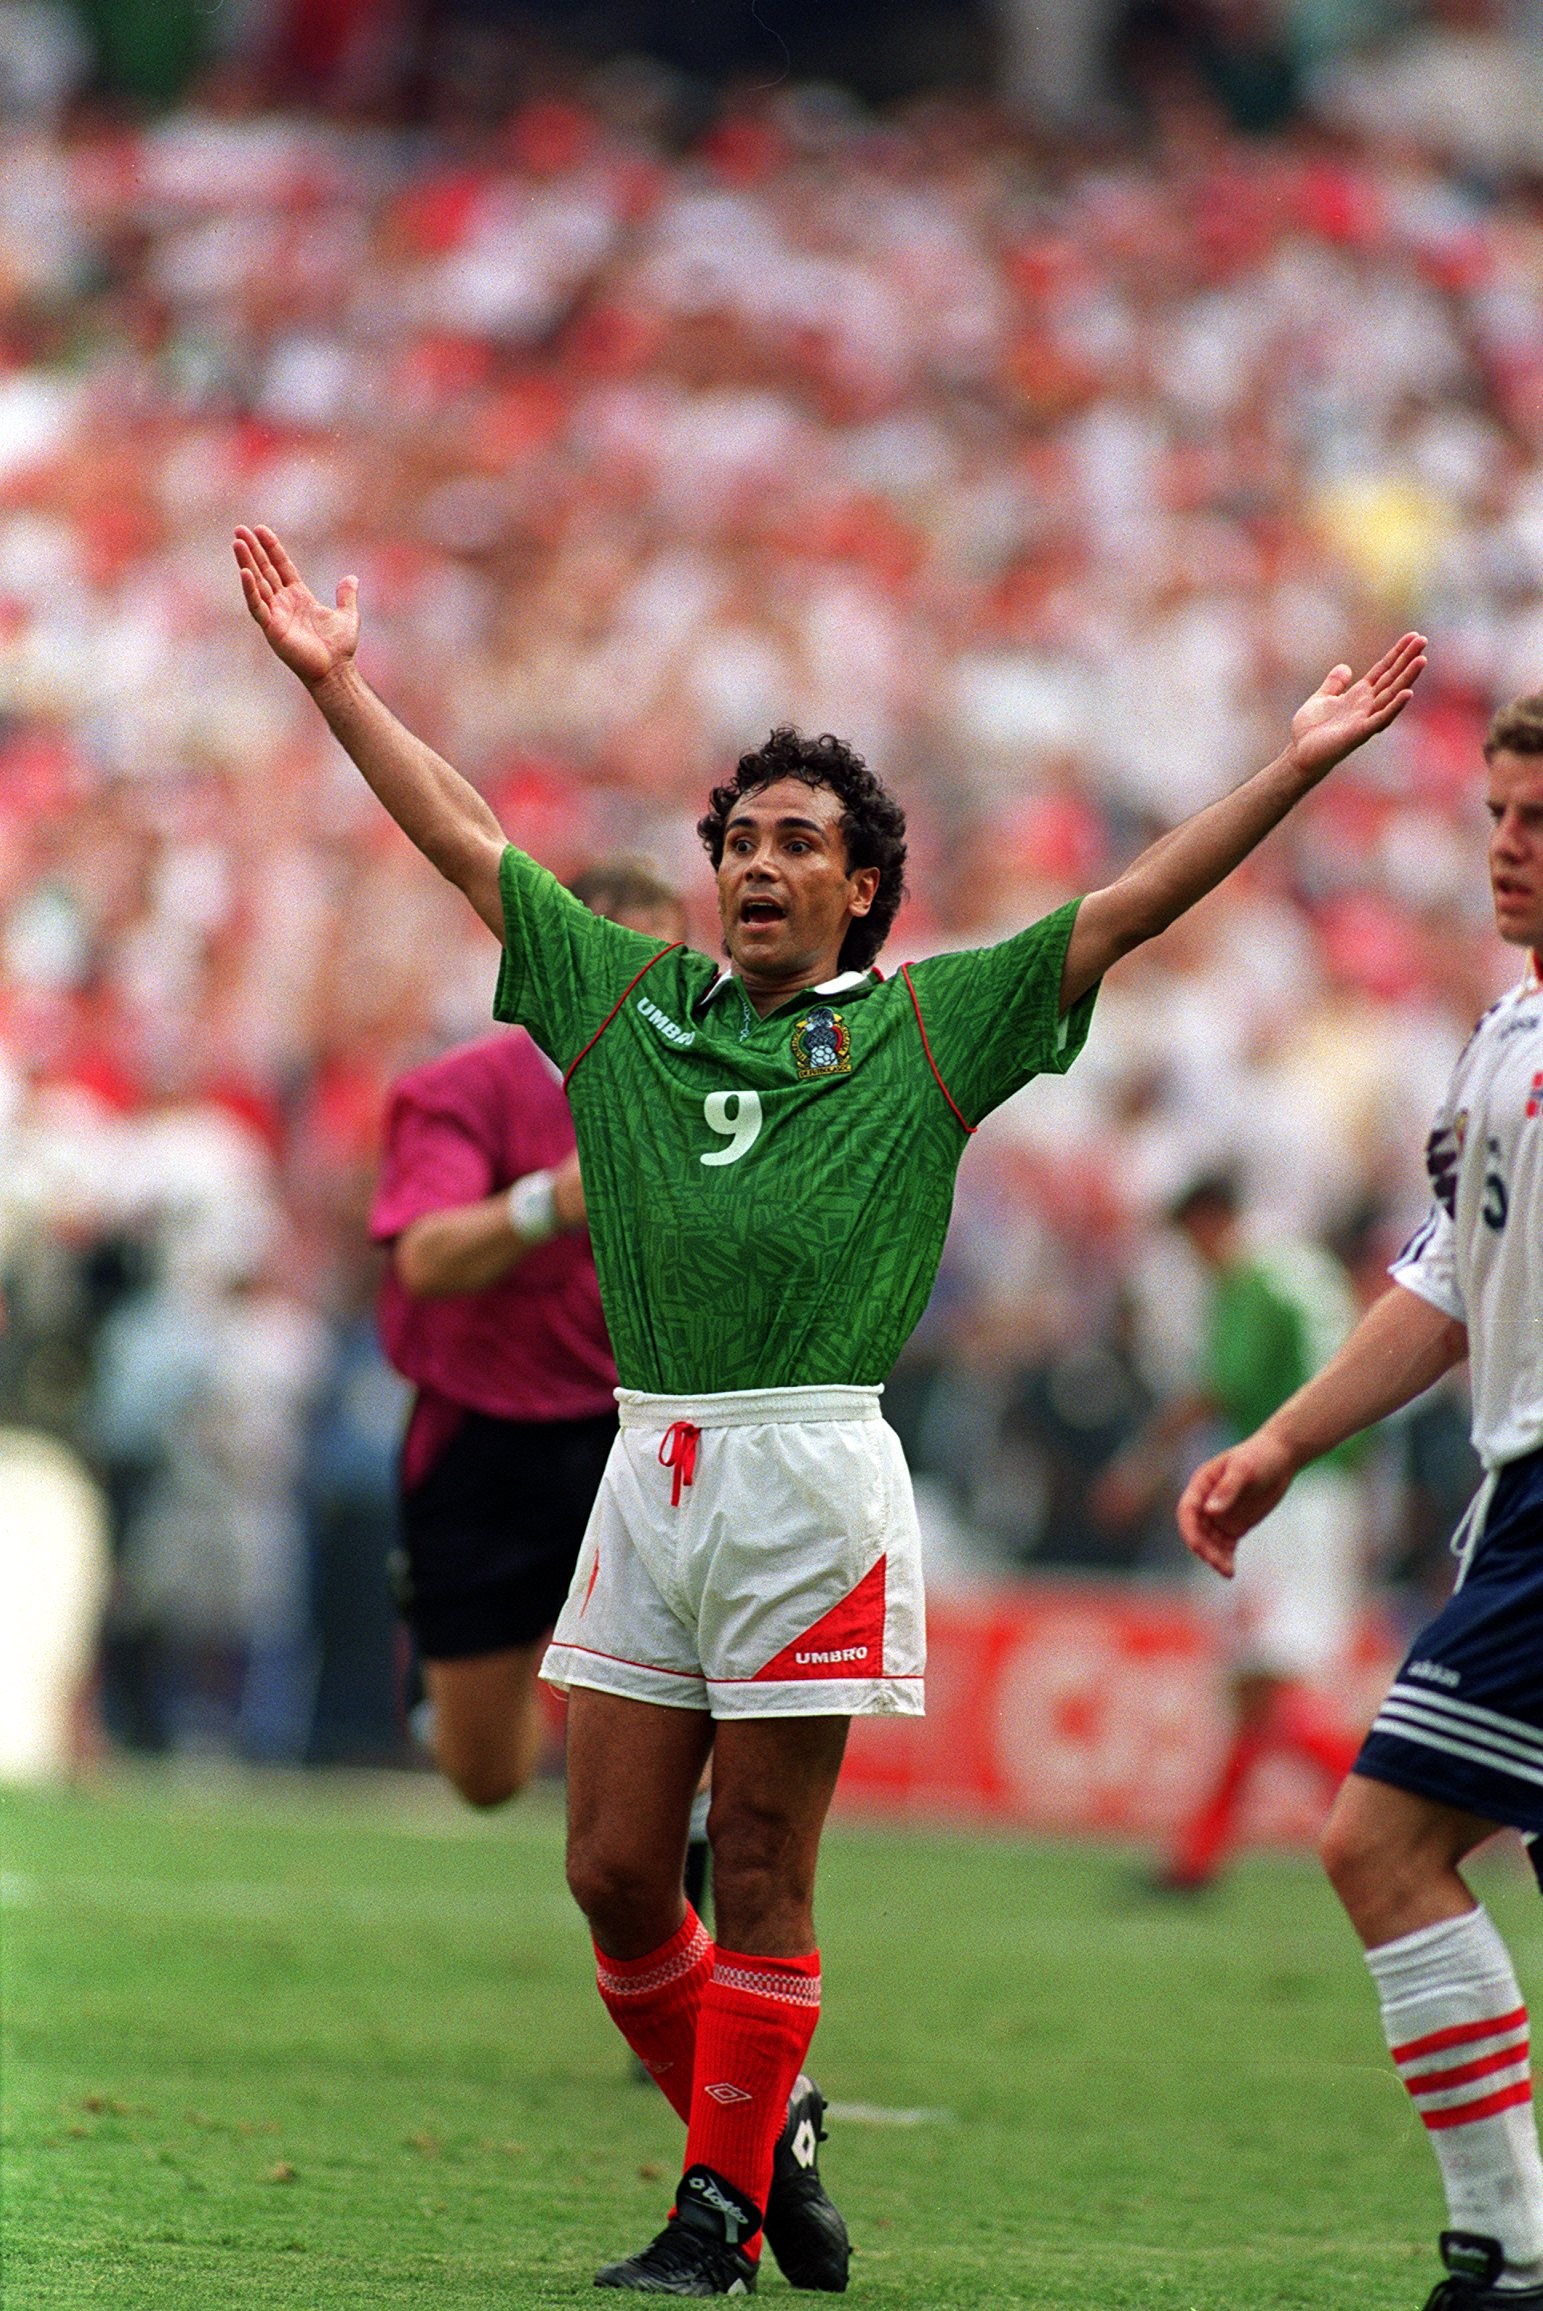 19 JUN 1994:  AN ANIMATED HUGO SANCHEZ OF MEXICO DURING NORWAY'S 1-0 VICTORY OVER MEXICO IN THE 1994 WORLD CUP GAME AT RFK STADIUM IN WASHINGTON D.C. Mandatory Credit: Simon Bruty/ALLSPORT